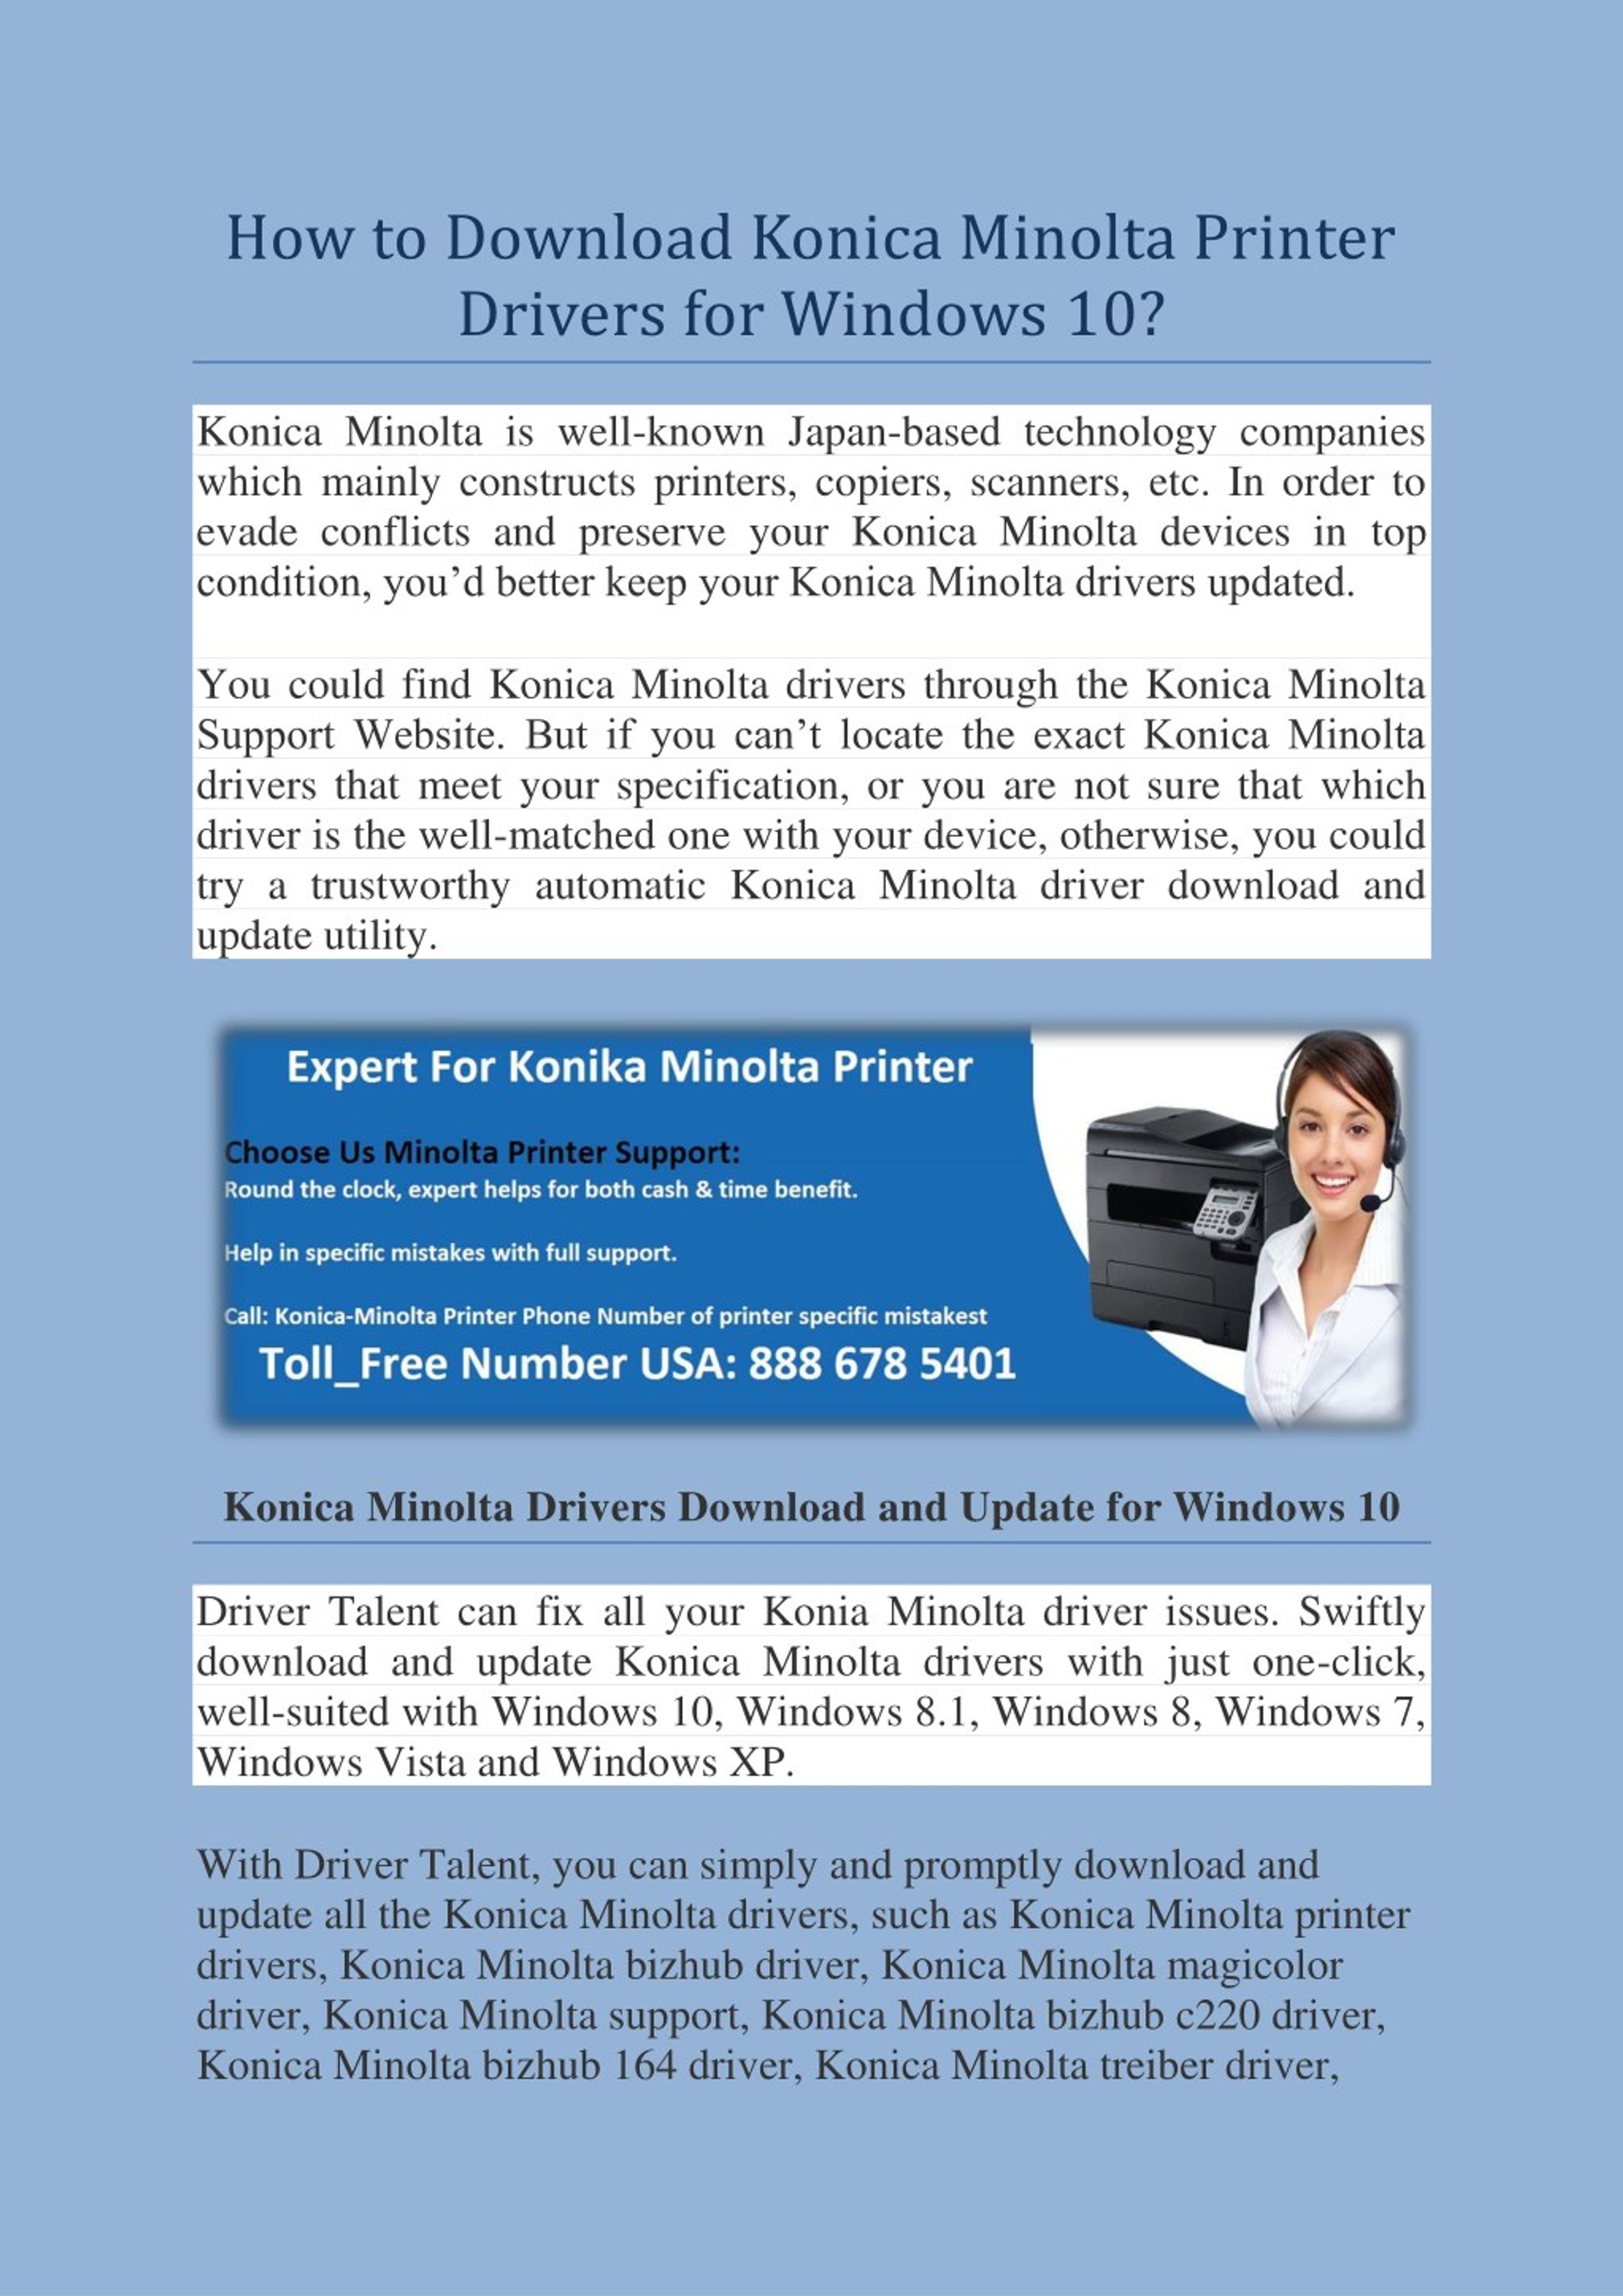 Ppt How To Download Konica Minolta Printer Drivers For Windows 10 Powerpoint Presentation Id 8058297